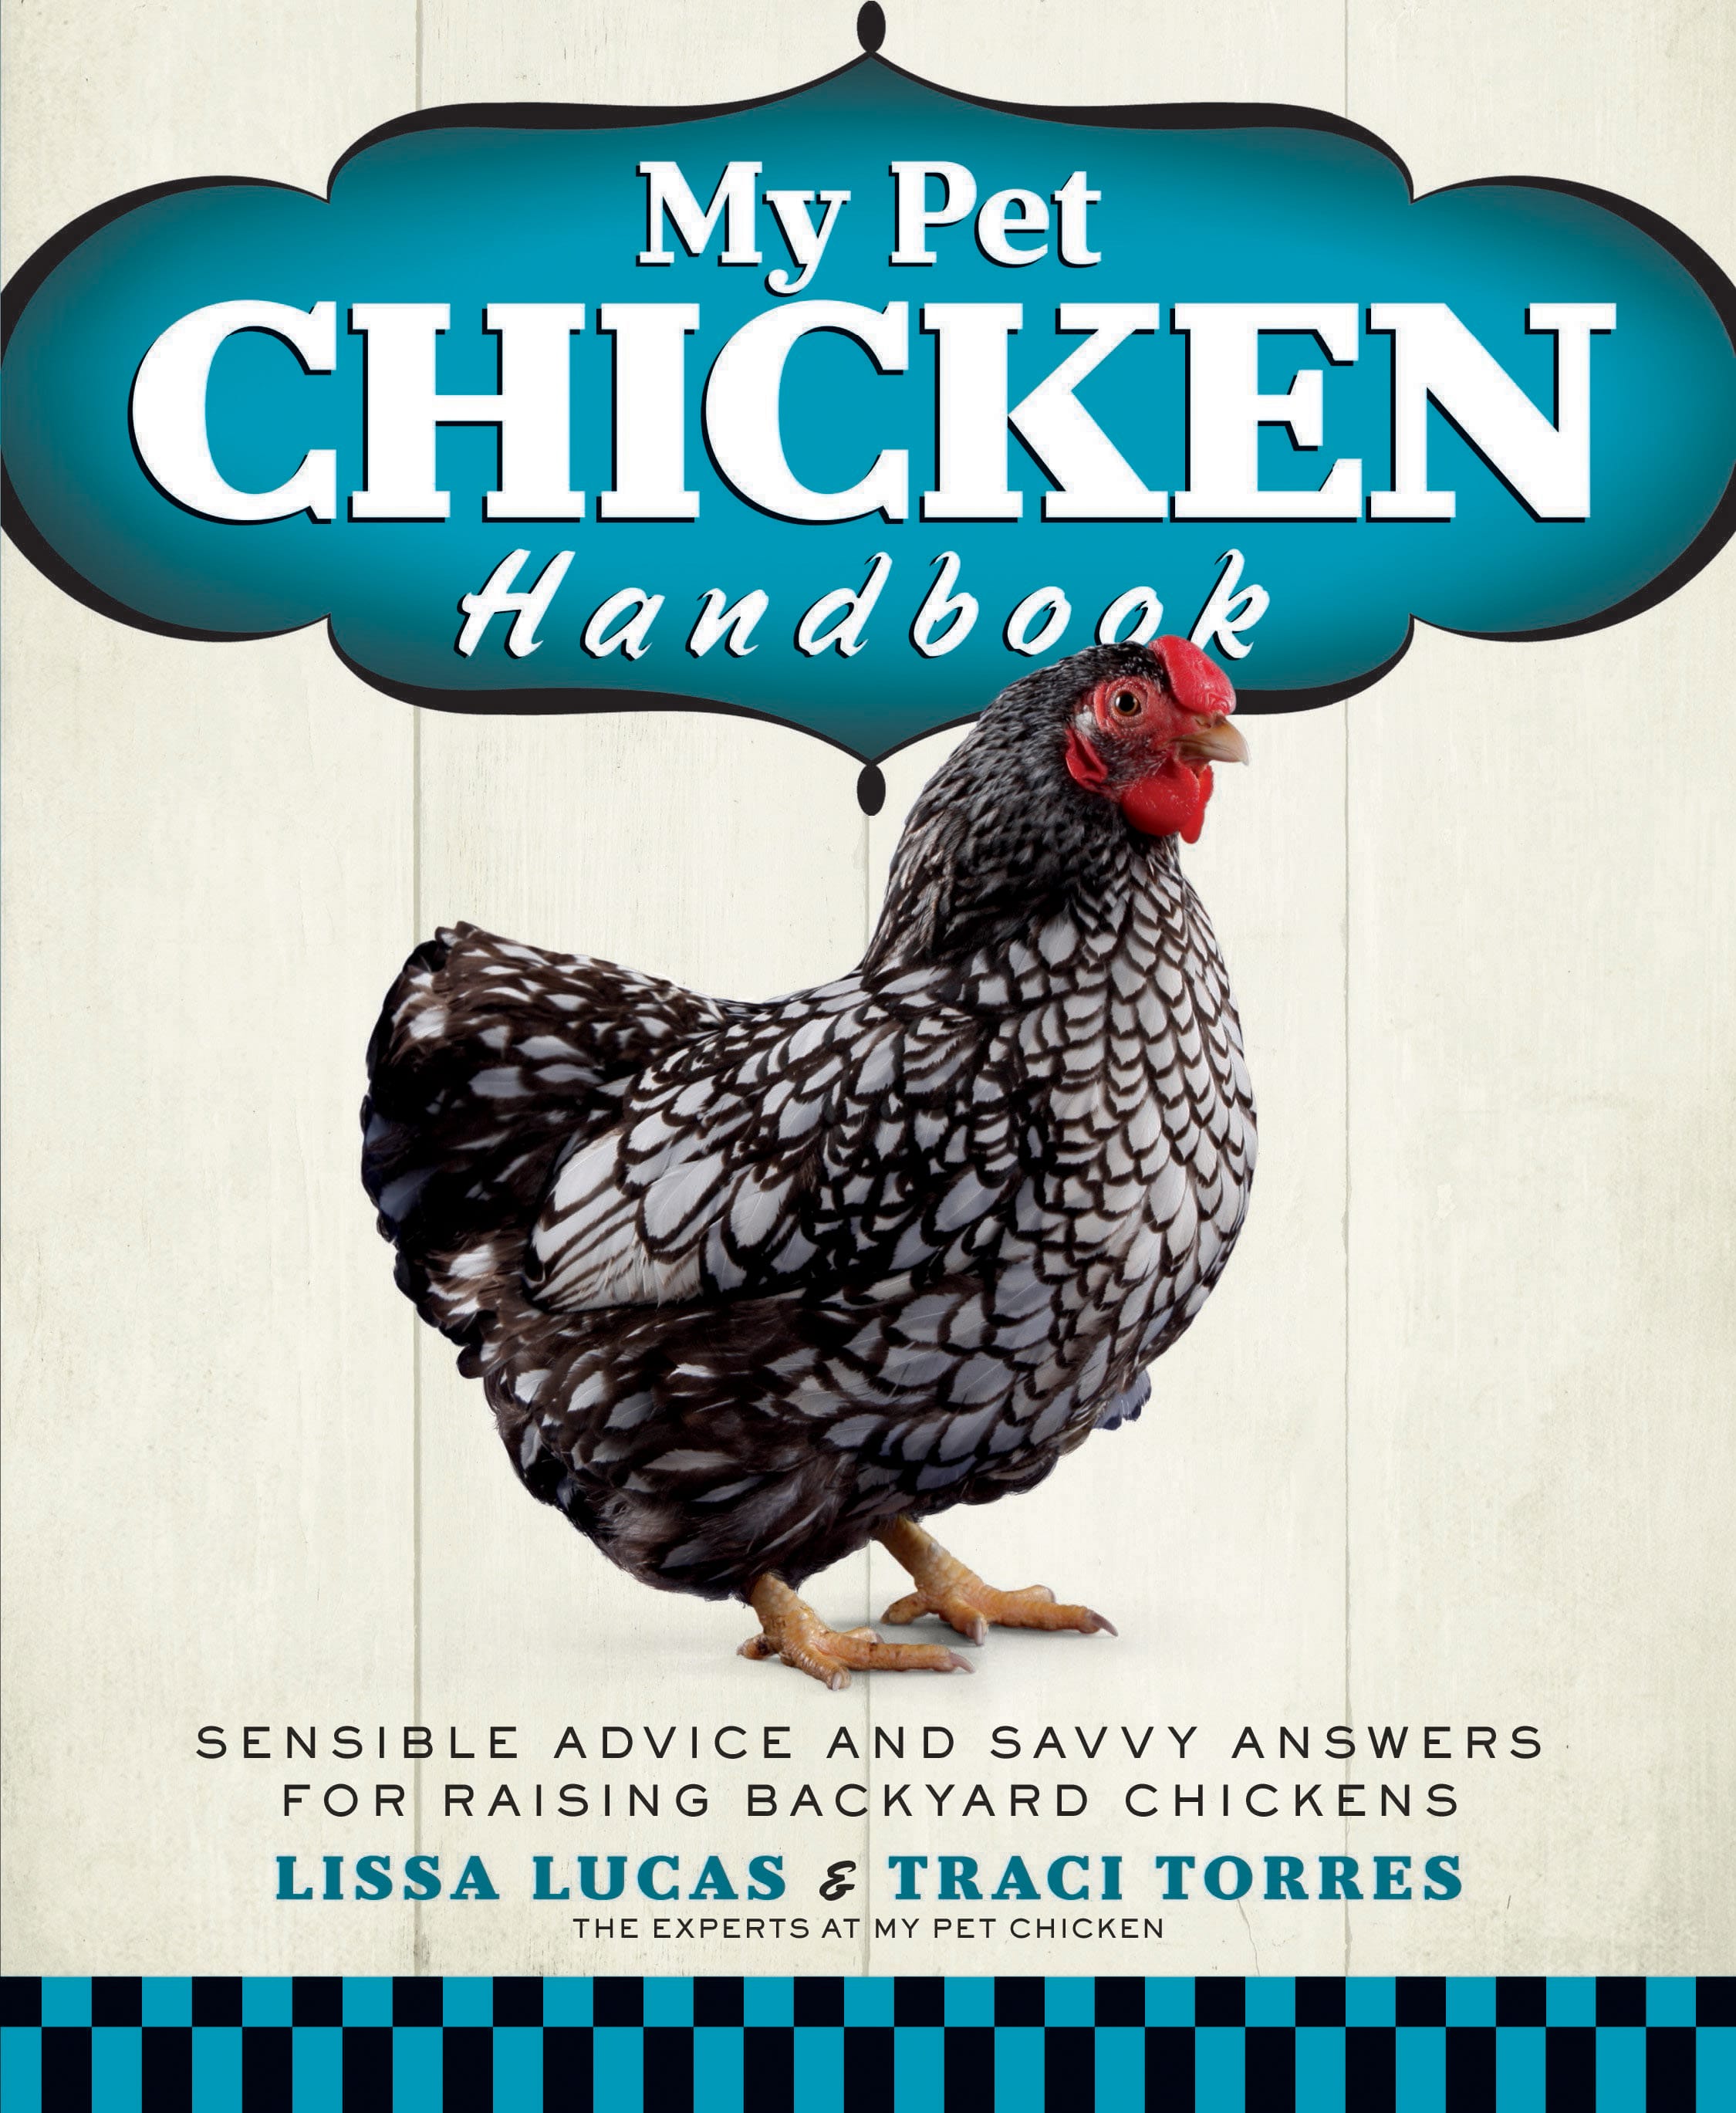 Lissa Lucas and Traci Torres, authors of &quot;My Pet Chicken Handbook,&quot; address the growing popularity of owning your own flock and crack open some practical advice.